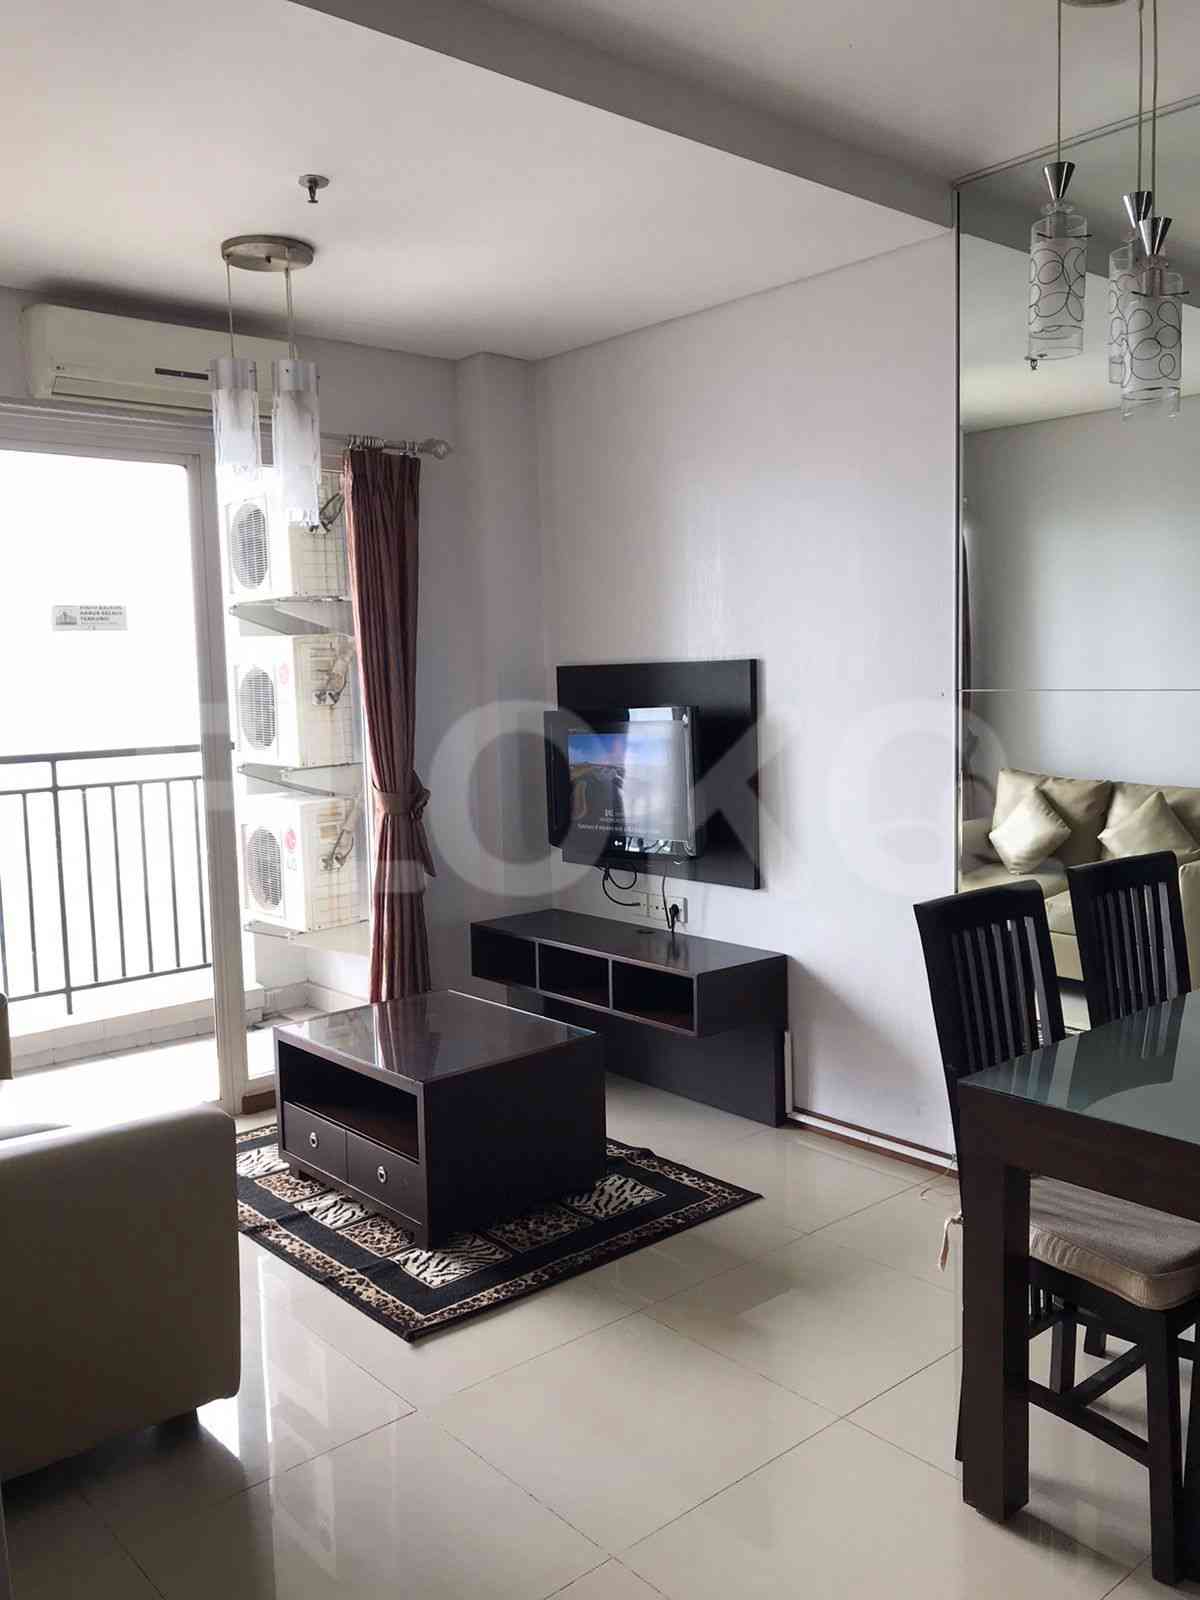 2 Bedroom on 18th Floor for Rent in Thamrin Residence Apartment - fth289 4